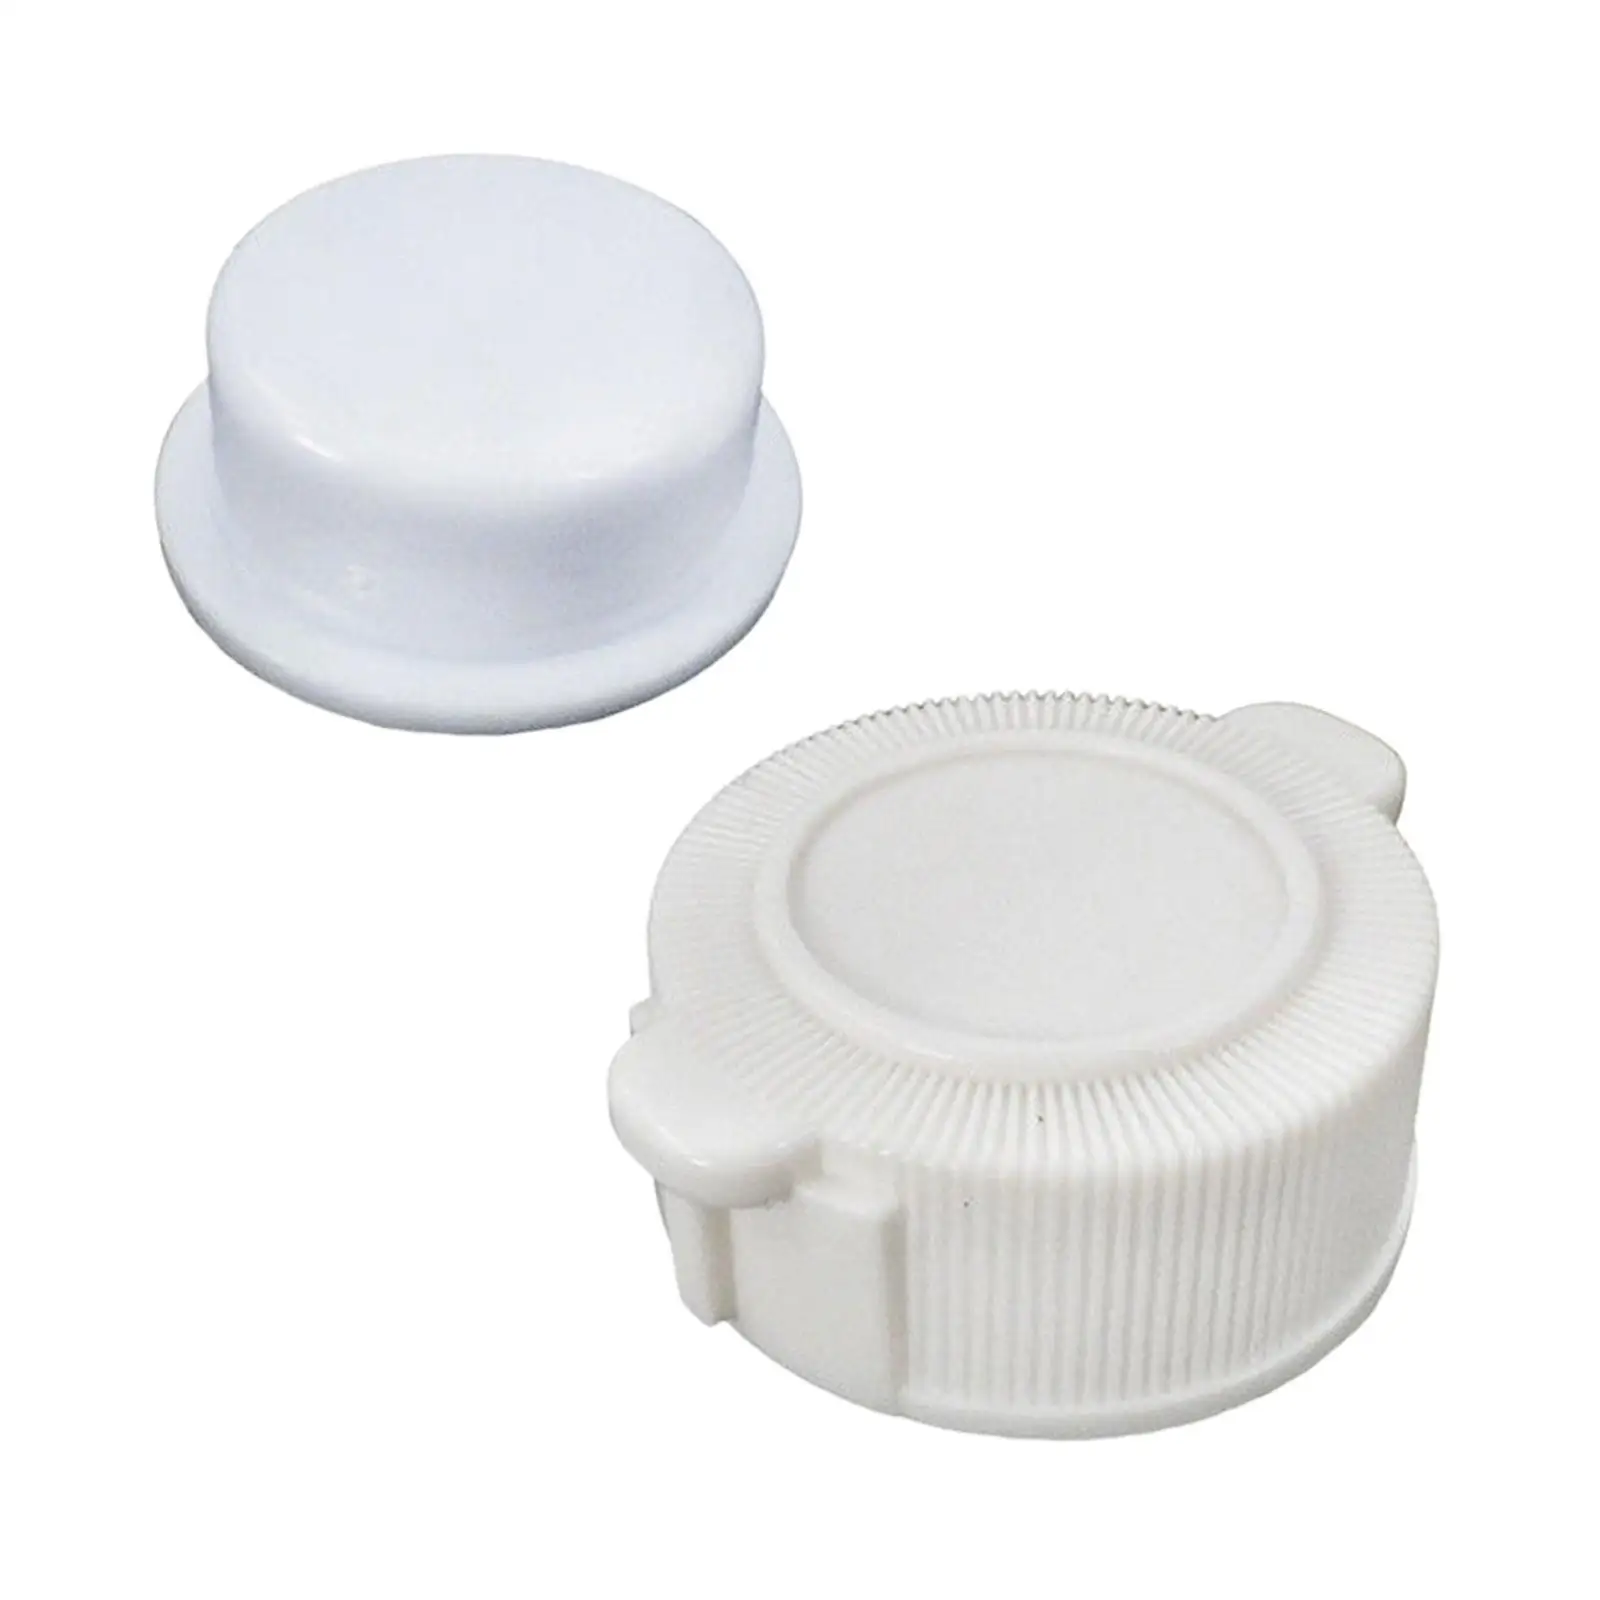 Pools Valve Cap and Plug Drainage Plug Accessories Easy to Install Spare Parts Durable Drain Plug Cap for Pools Air Mattress